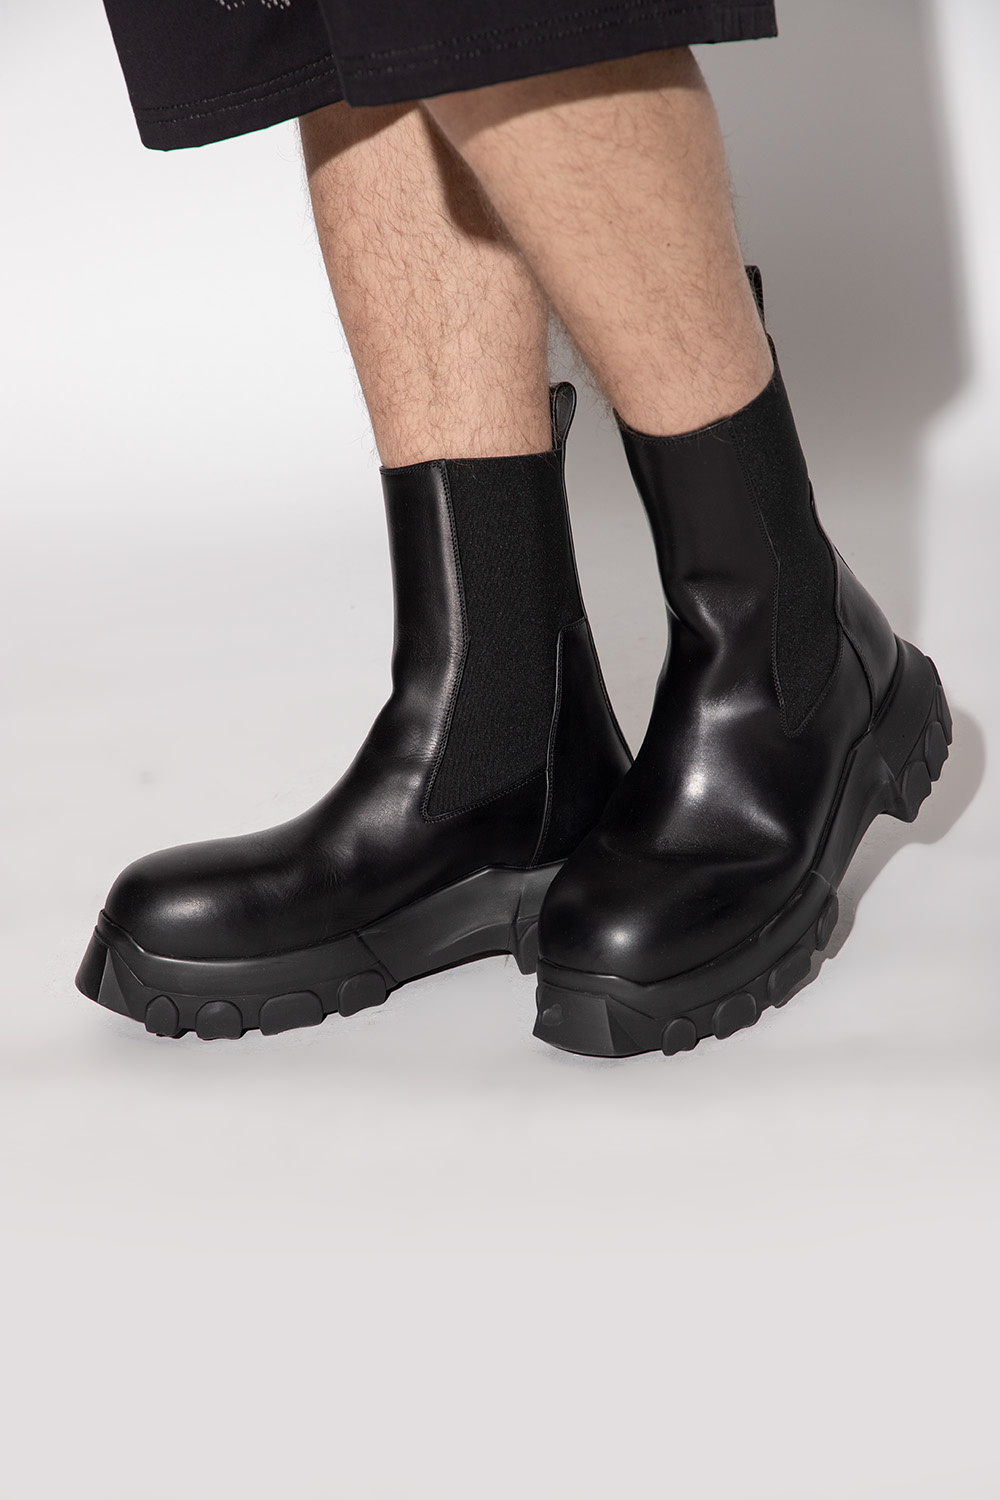 Rick Owens ‘Beatle Bozo Tractor’ leather ankle boots